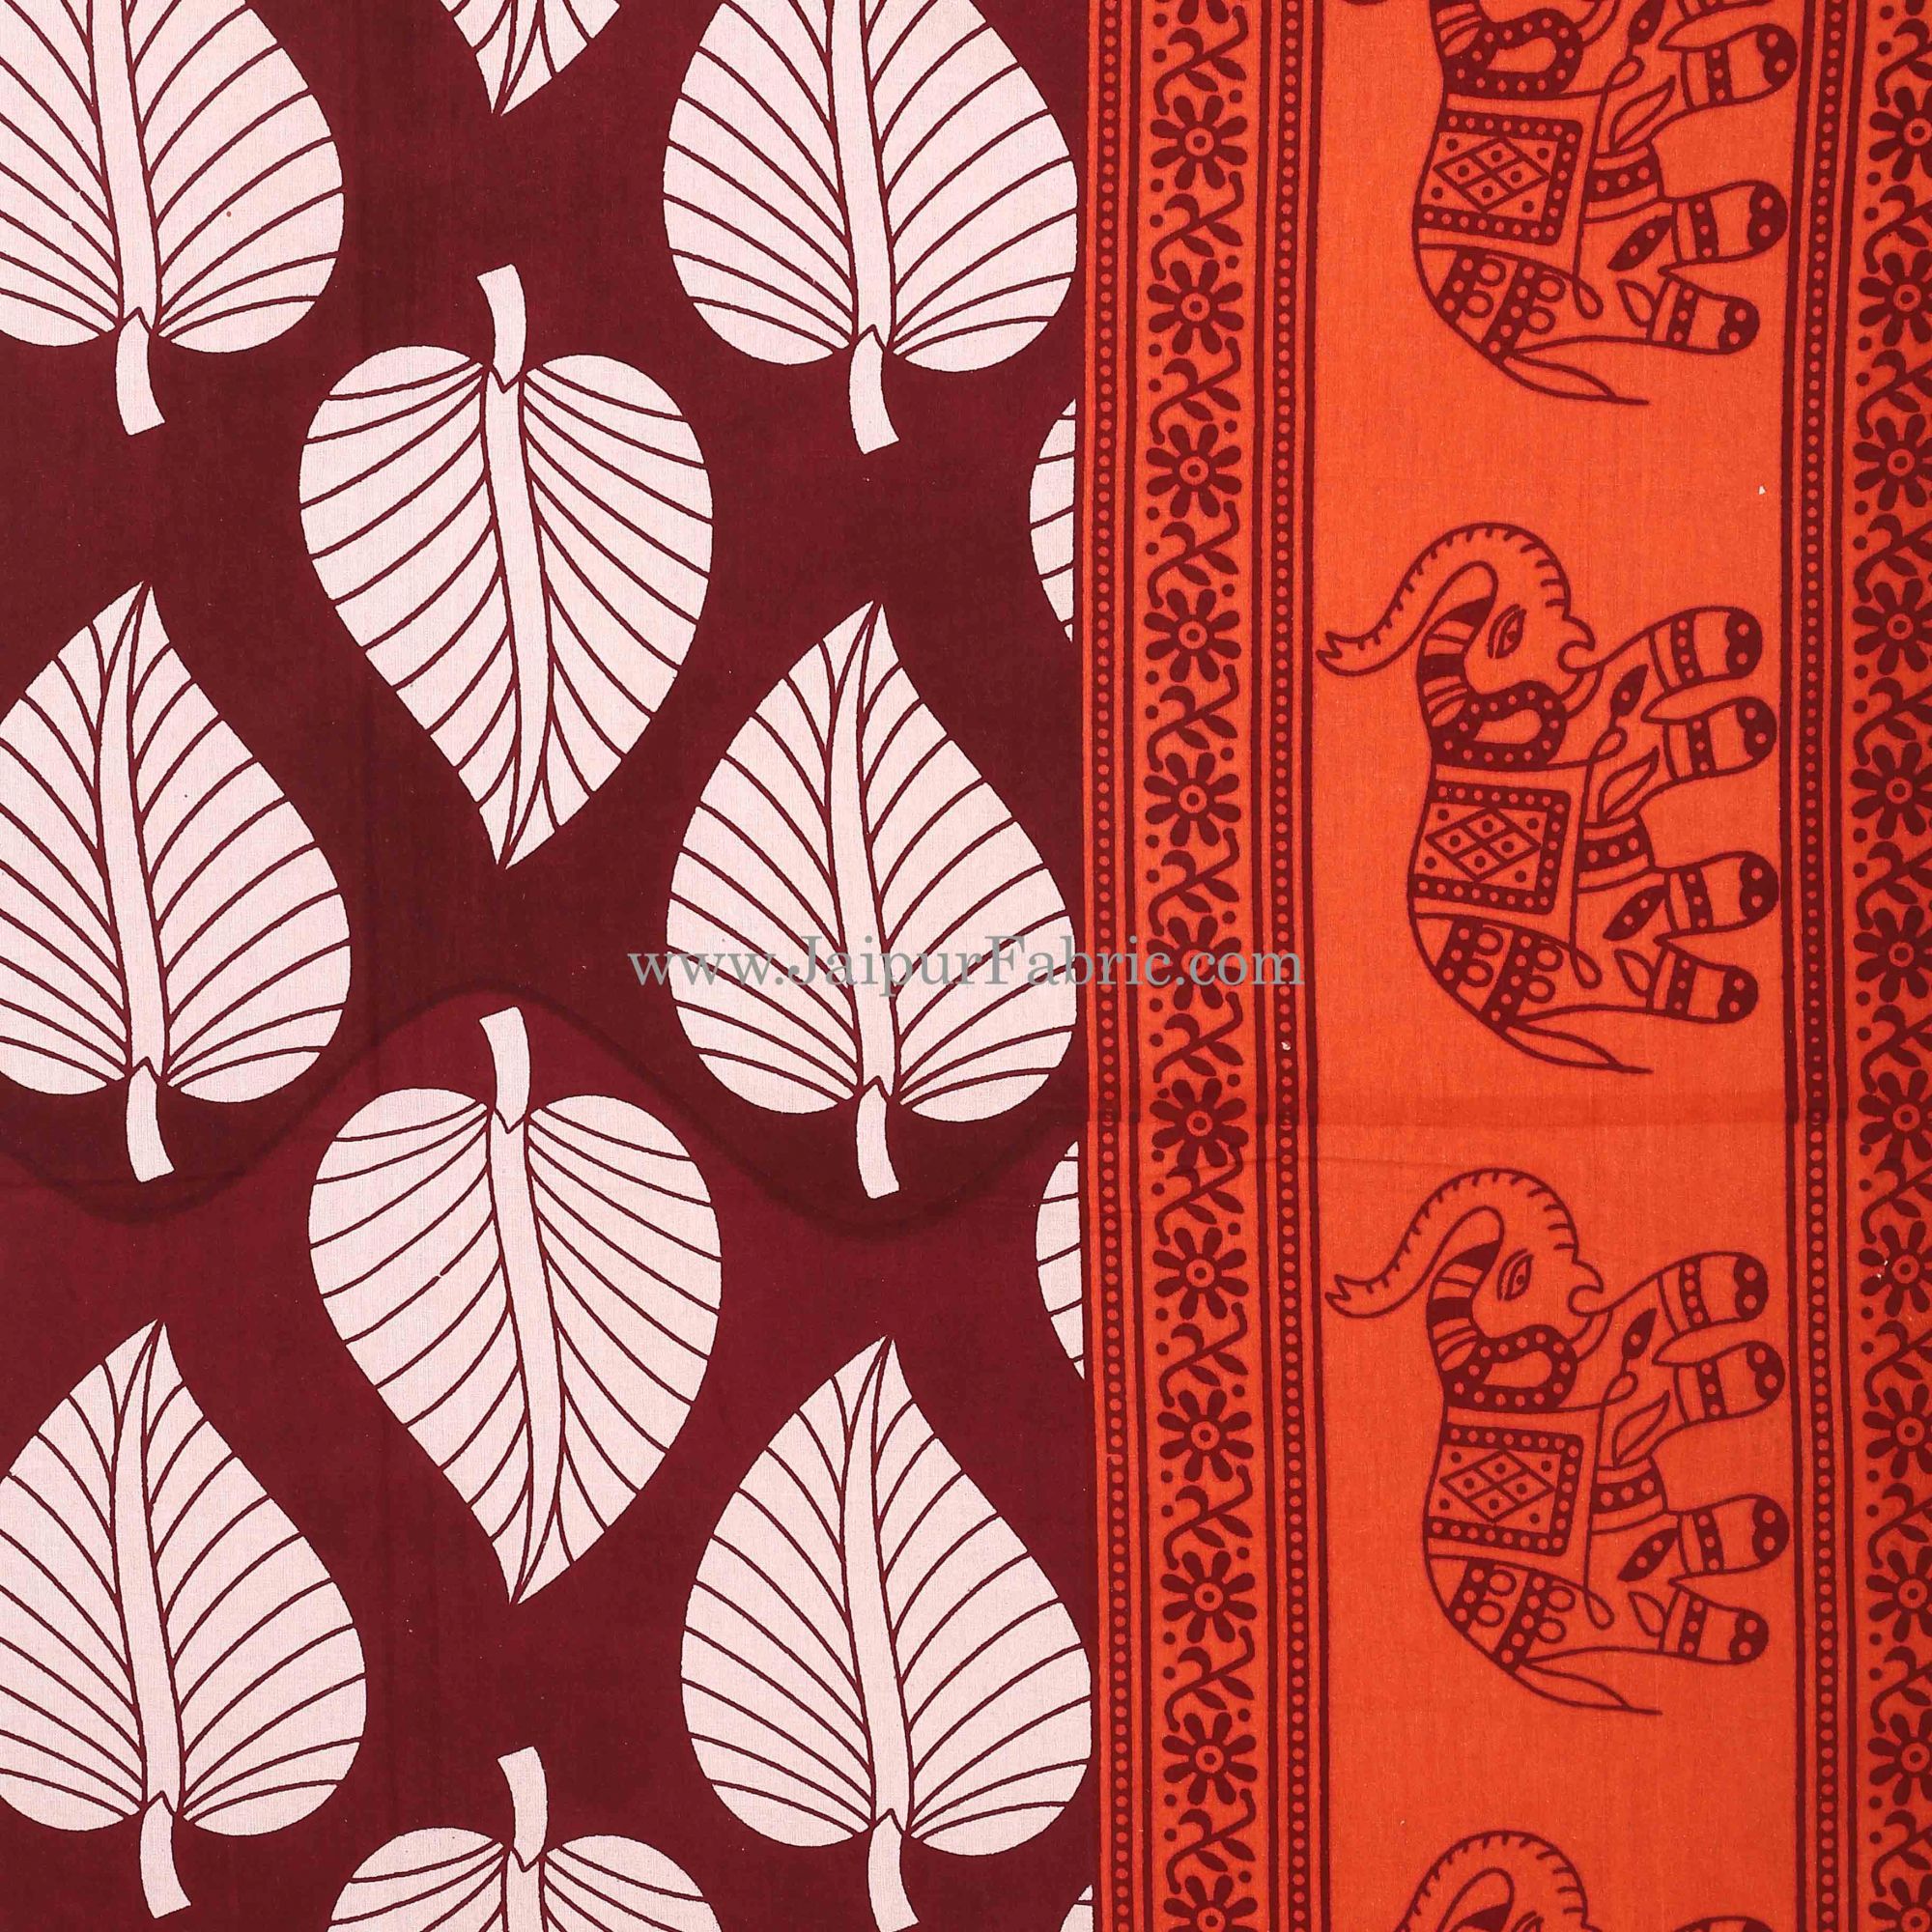 Orange  Border With  Red Base Paan Pattern Cotton Double Bed Sheet